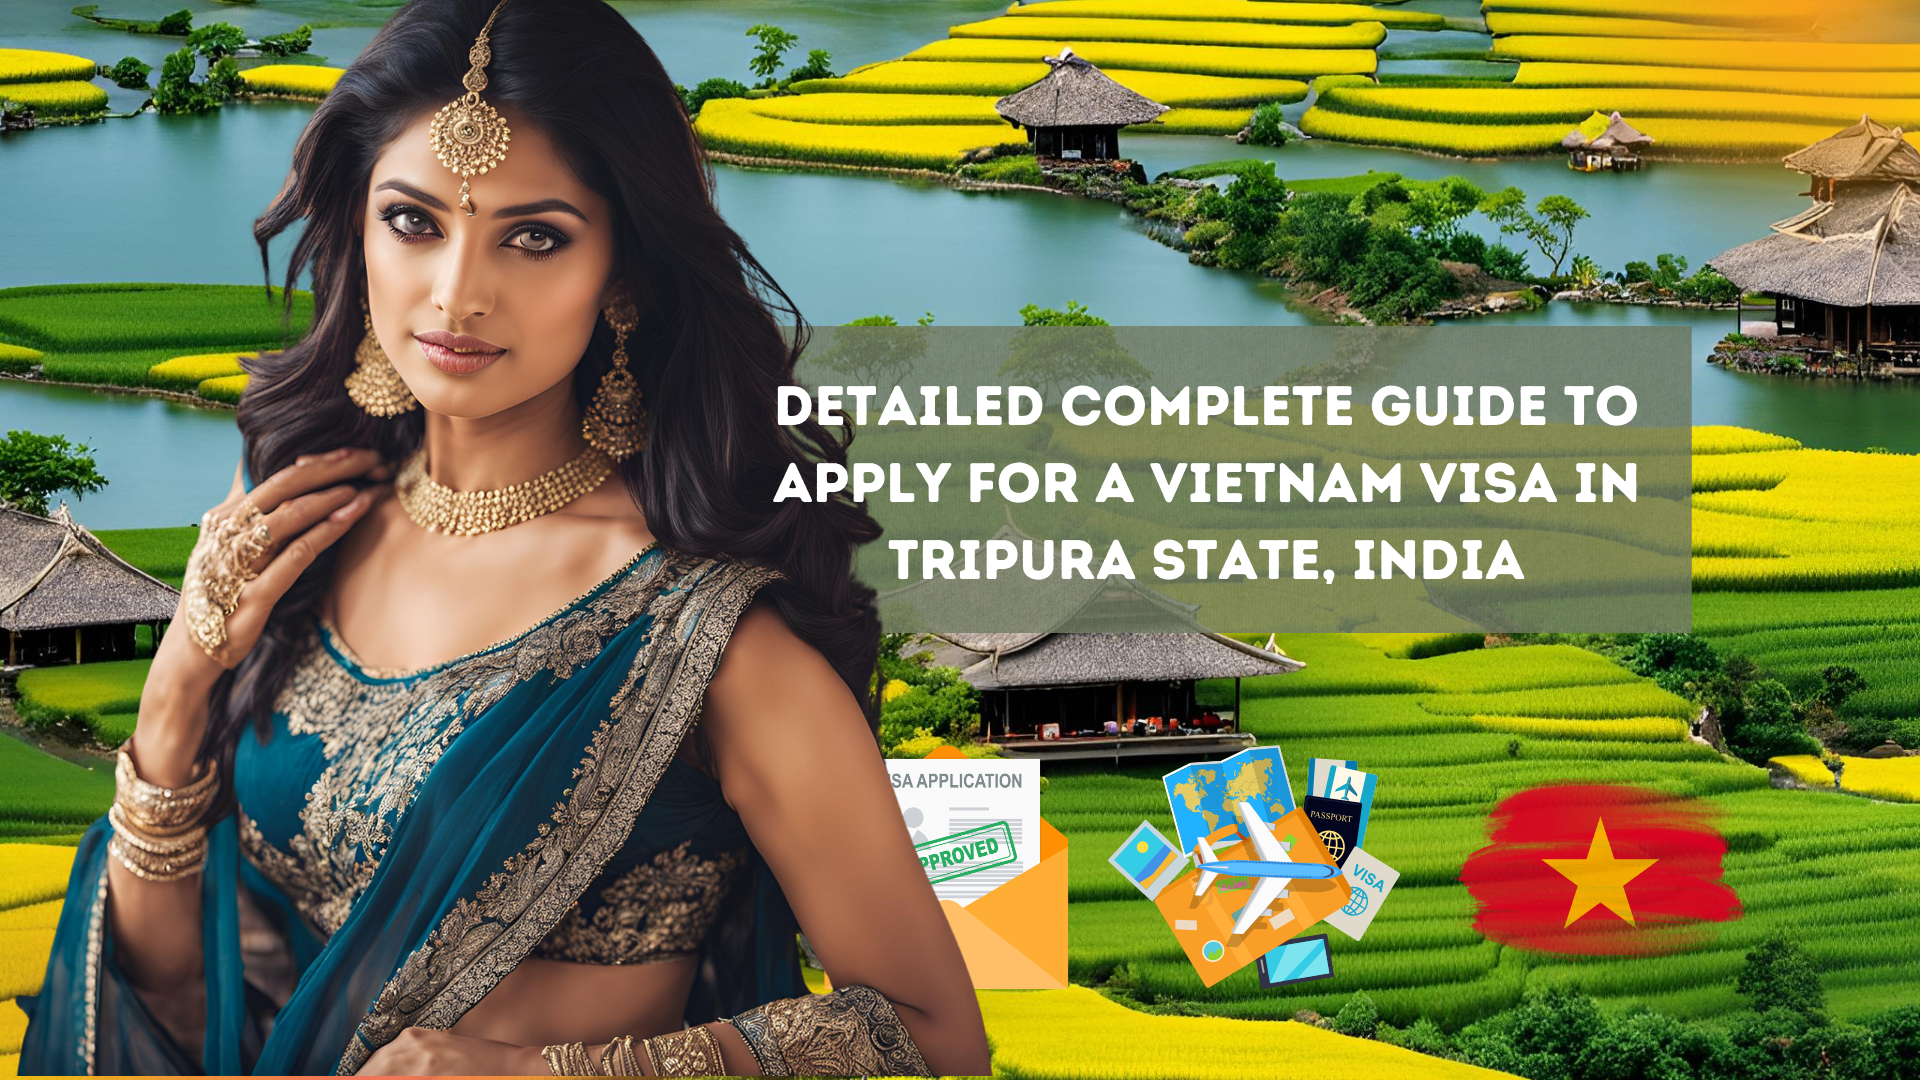 Detailed Complete Guide to Apply for a Vietnam Visa in Tripura State, India